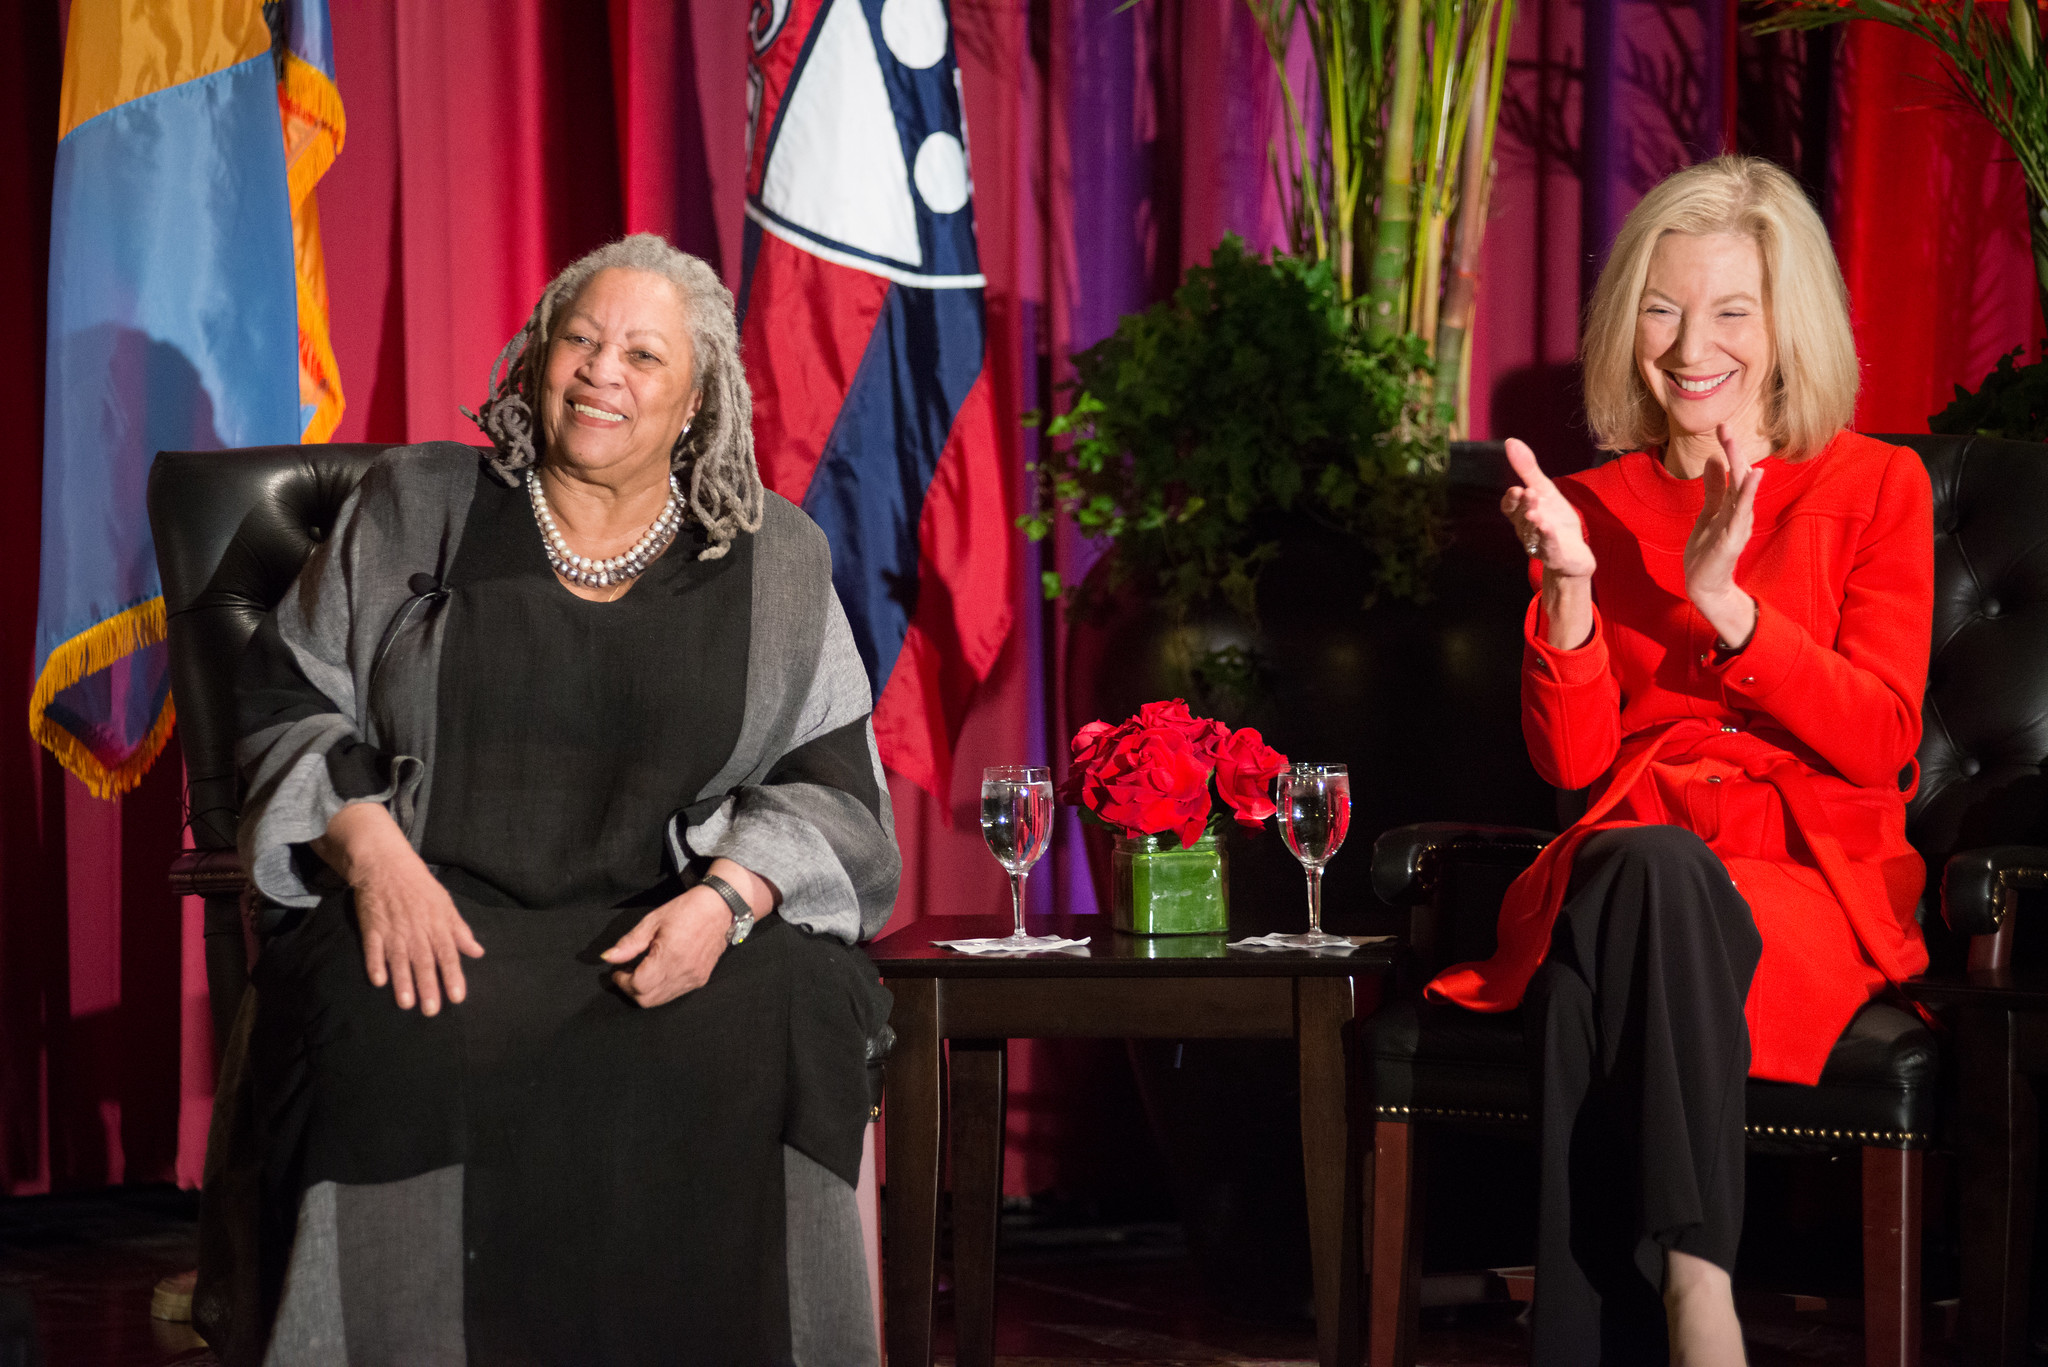 Amy Gutmann and Toni Morrison seated on stage with flags behind them